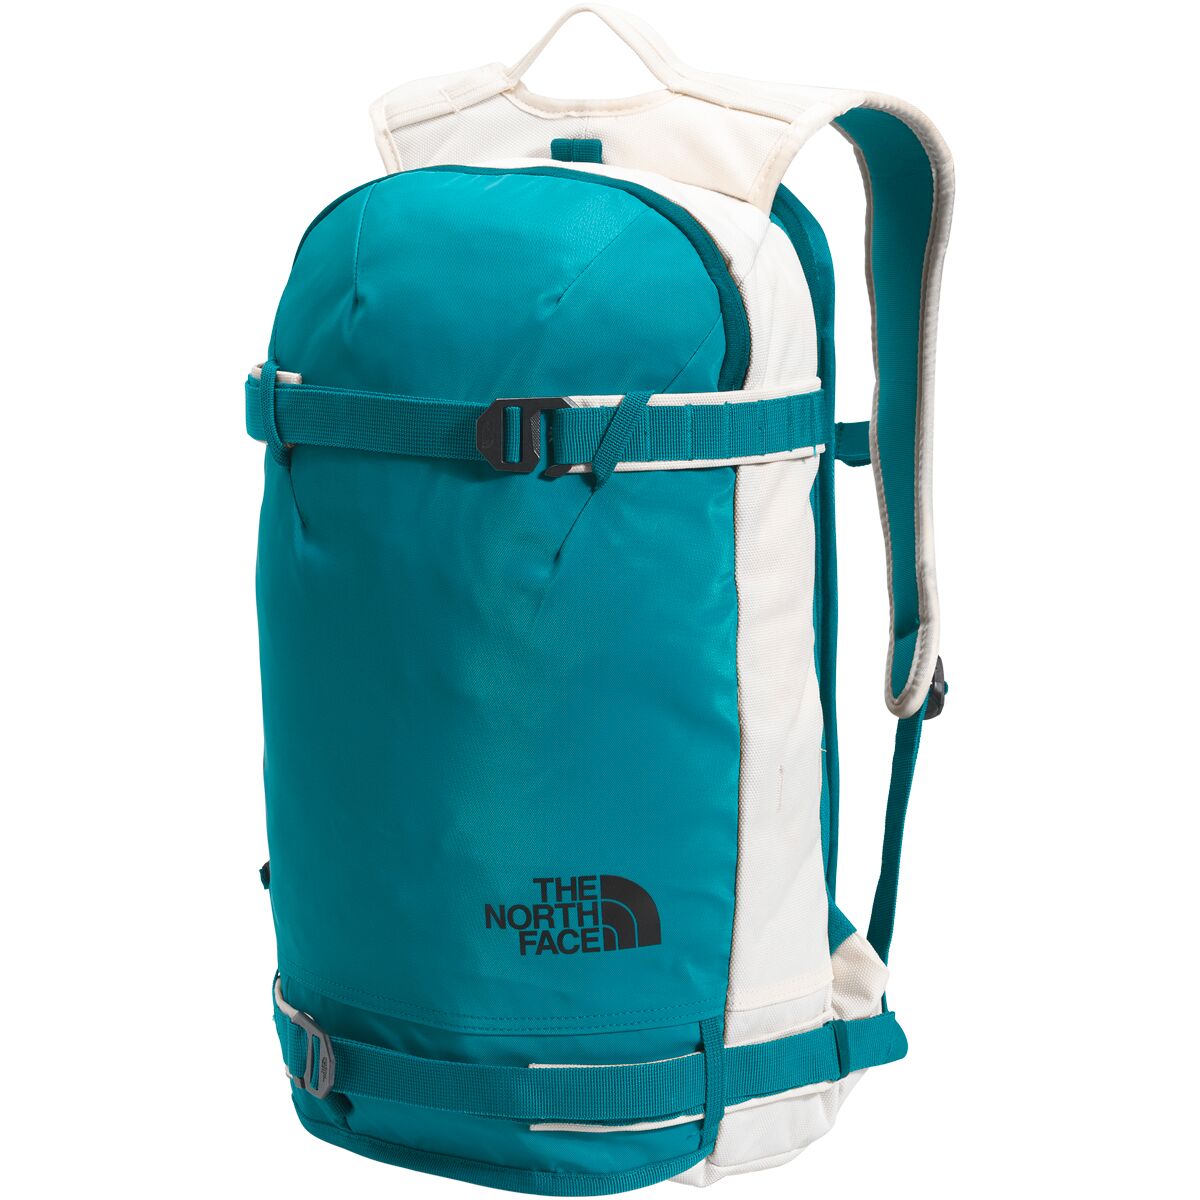 The North Face Slackpack 2.0 20L Backpack - Women's